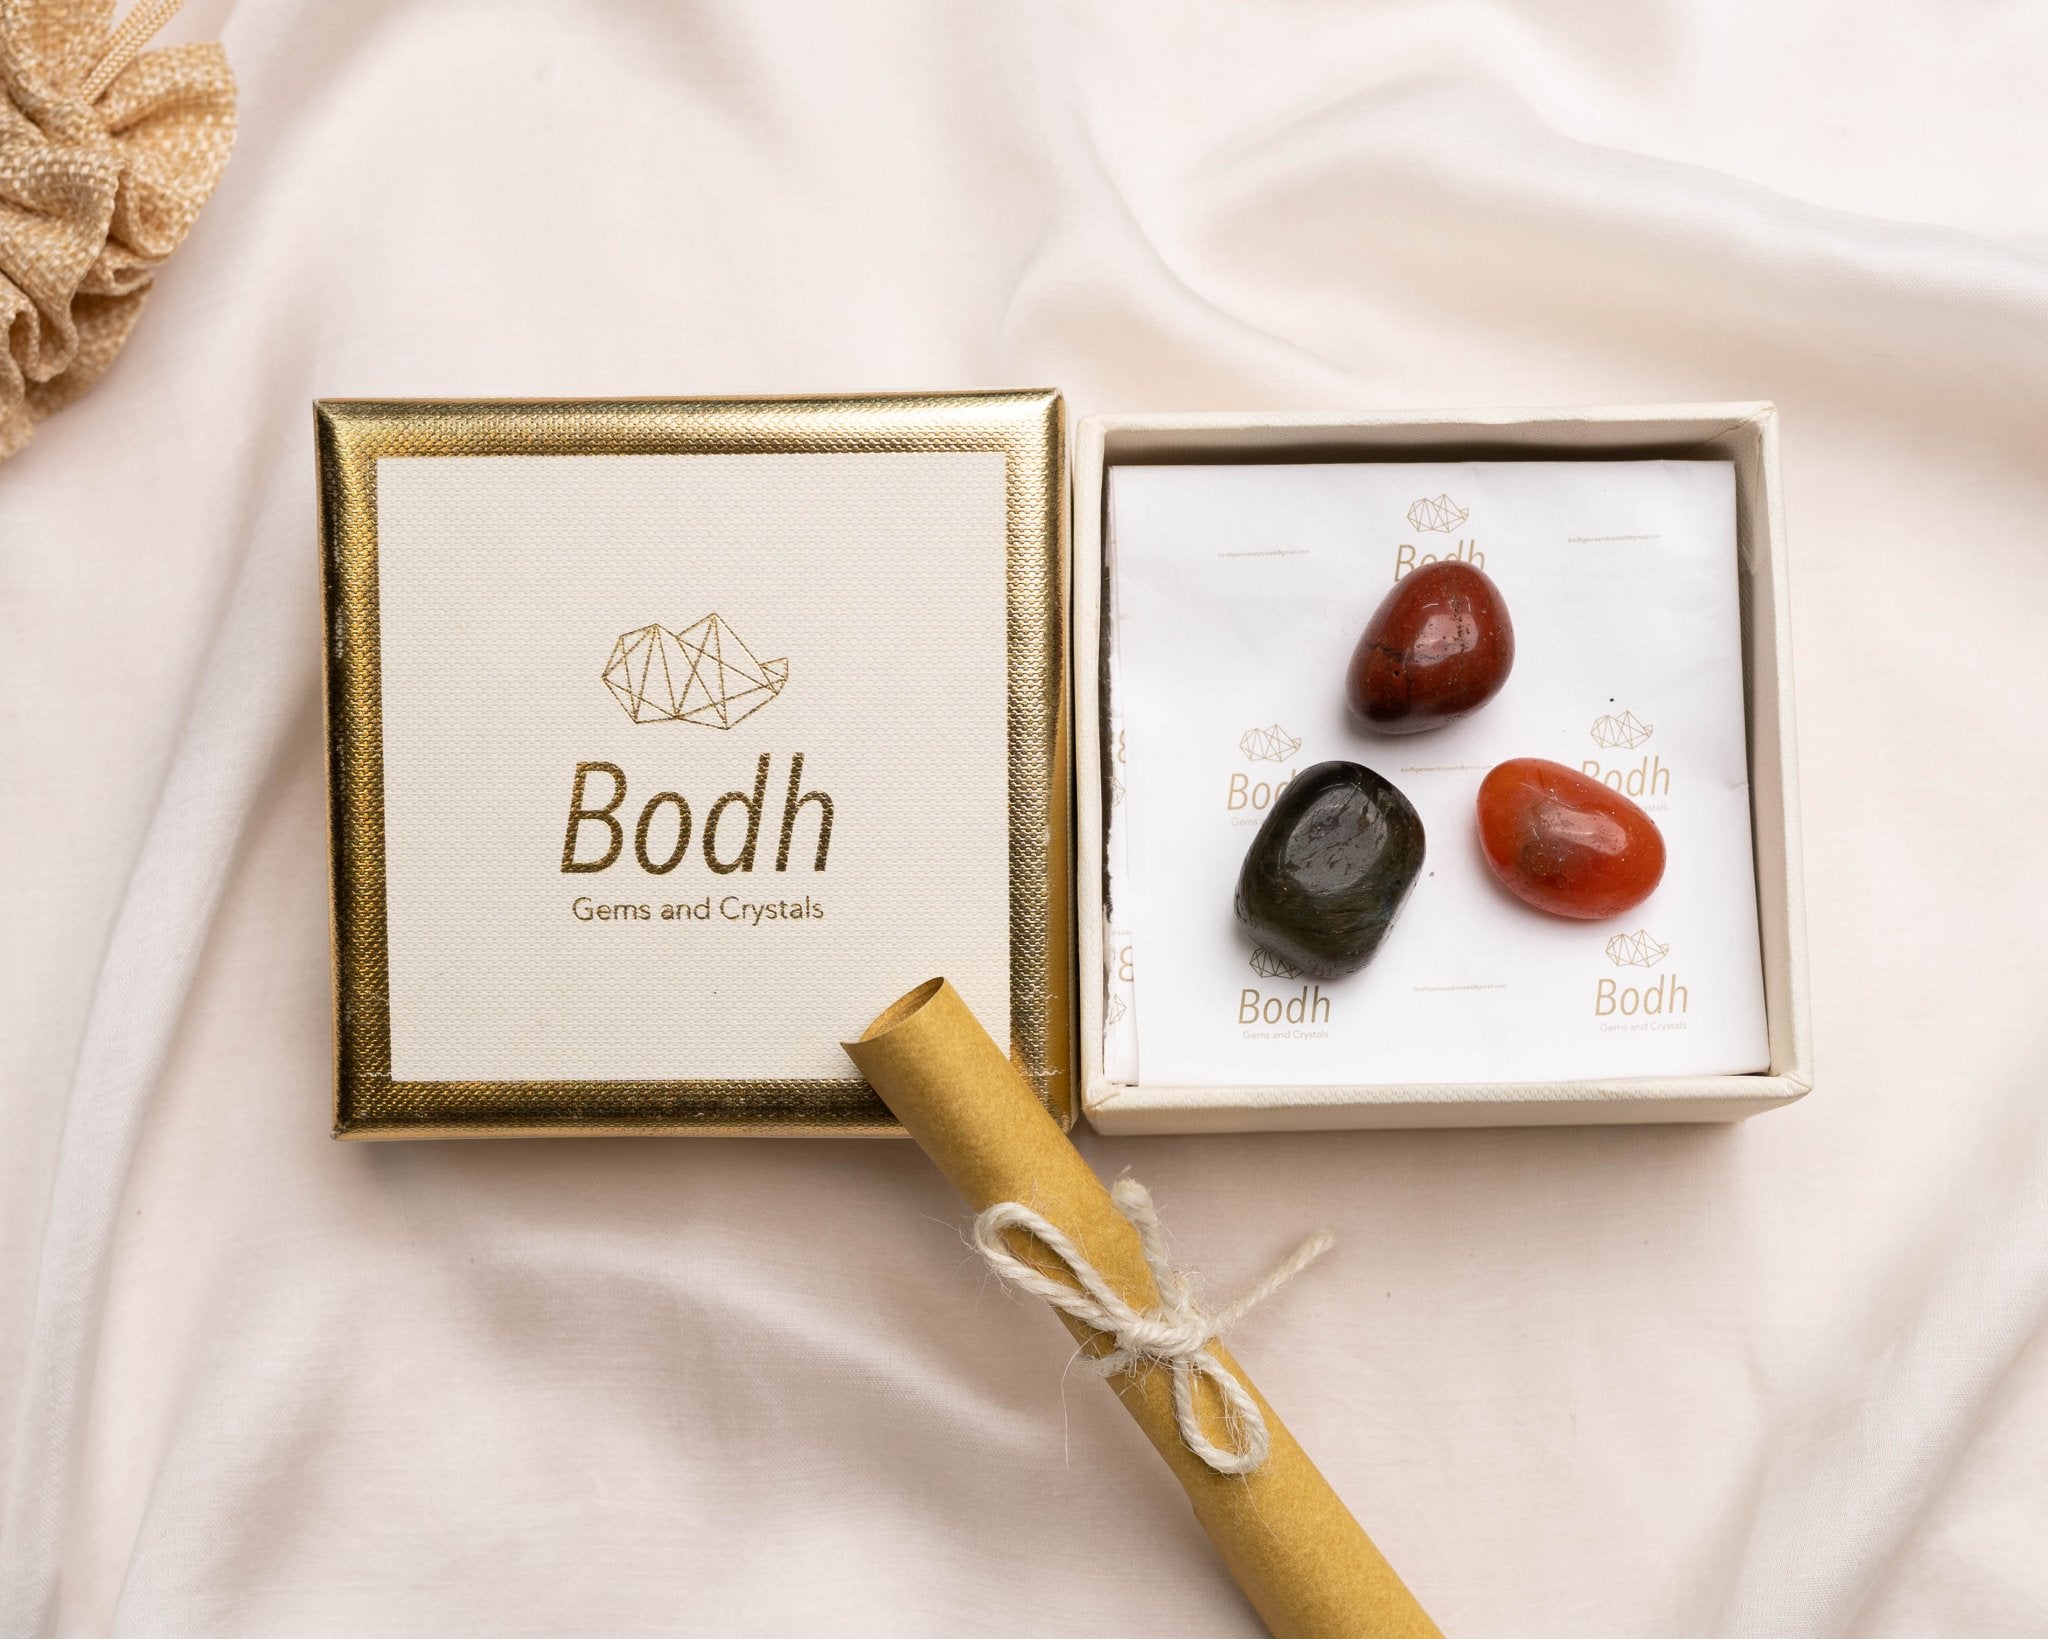 Passion & Creativity Kit - Bodh Gem and Crystals